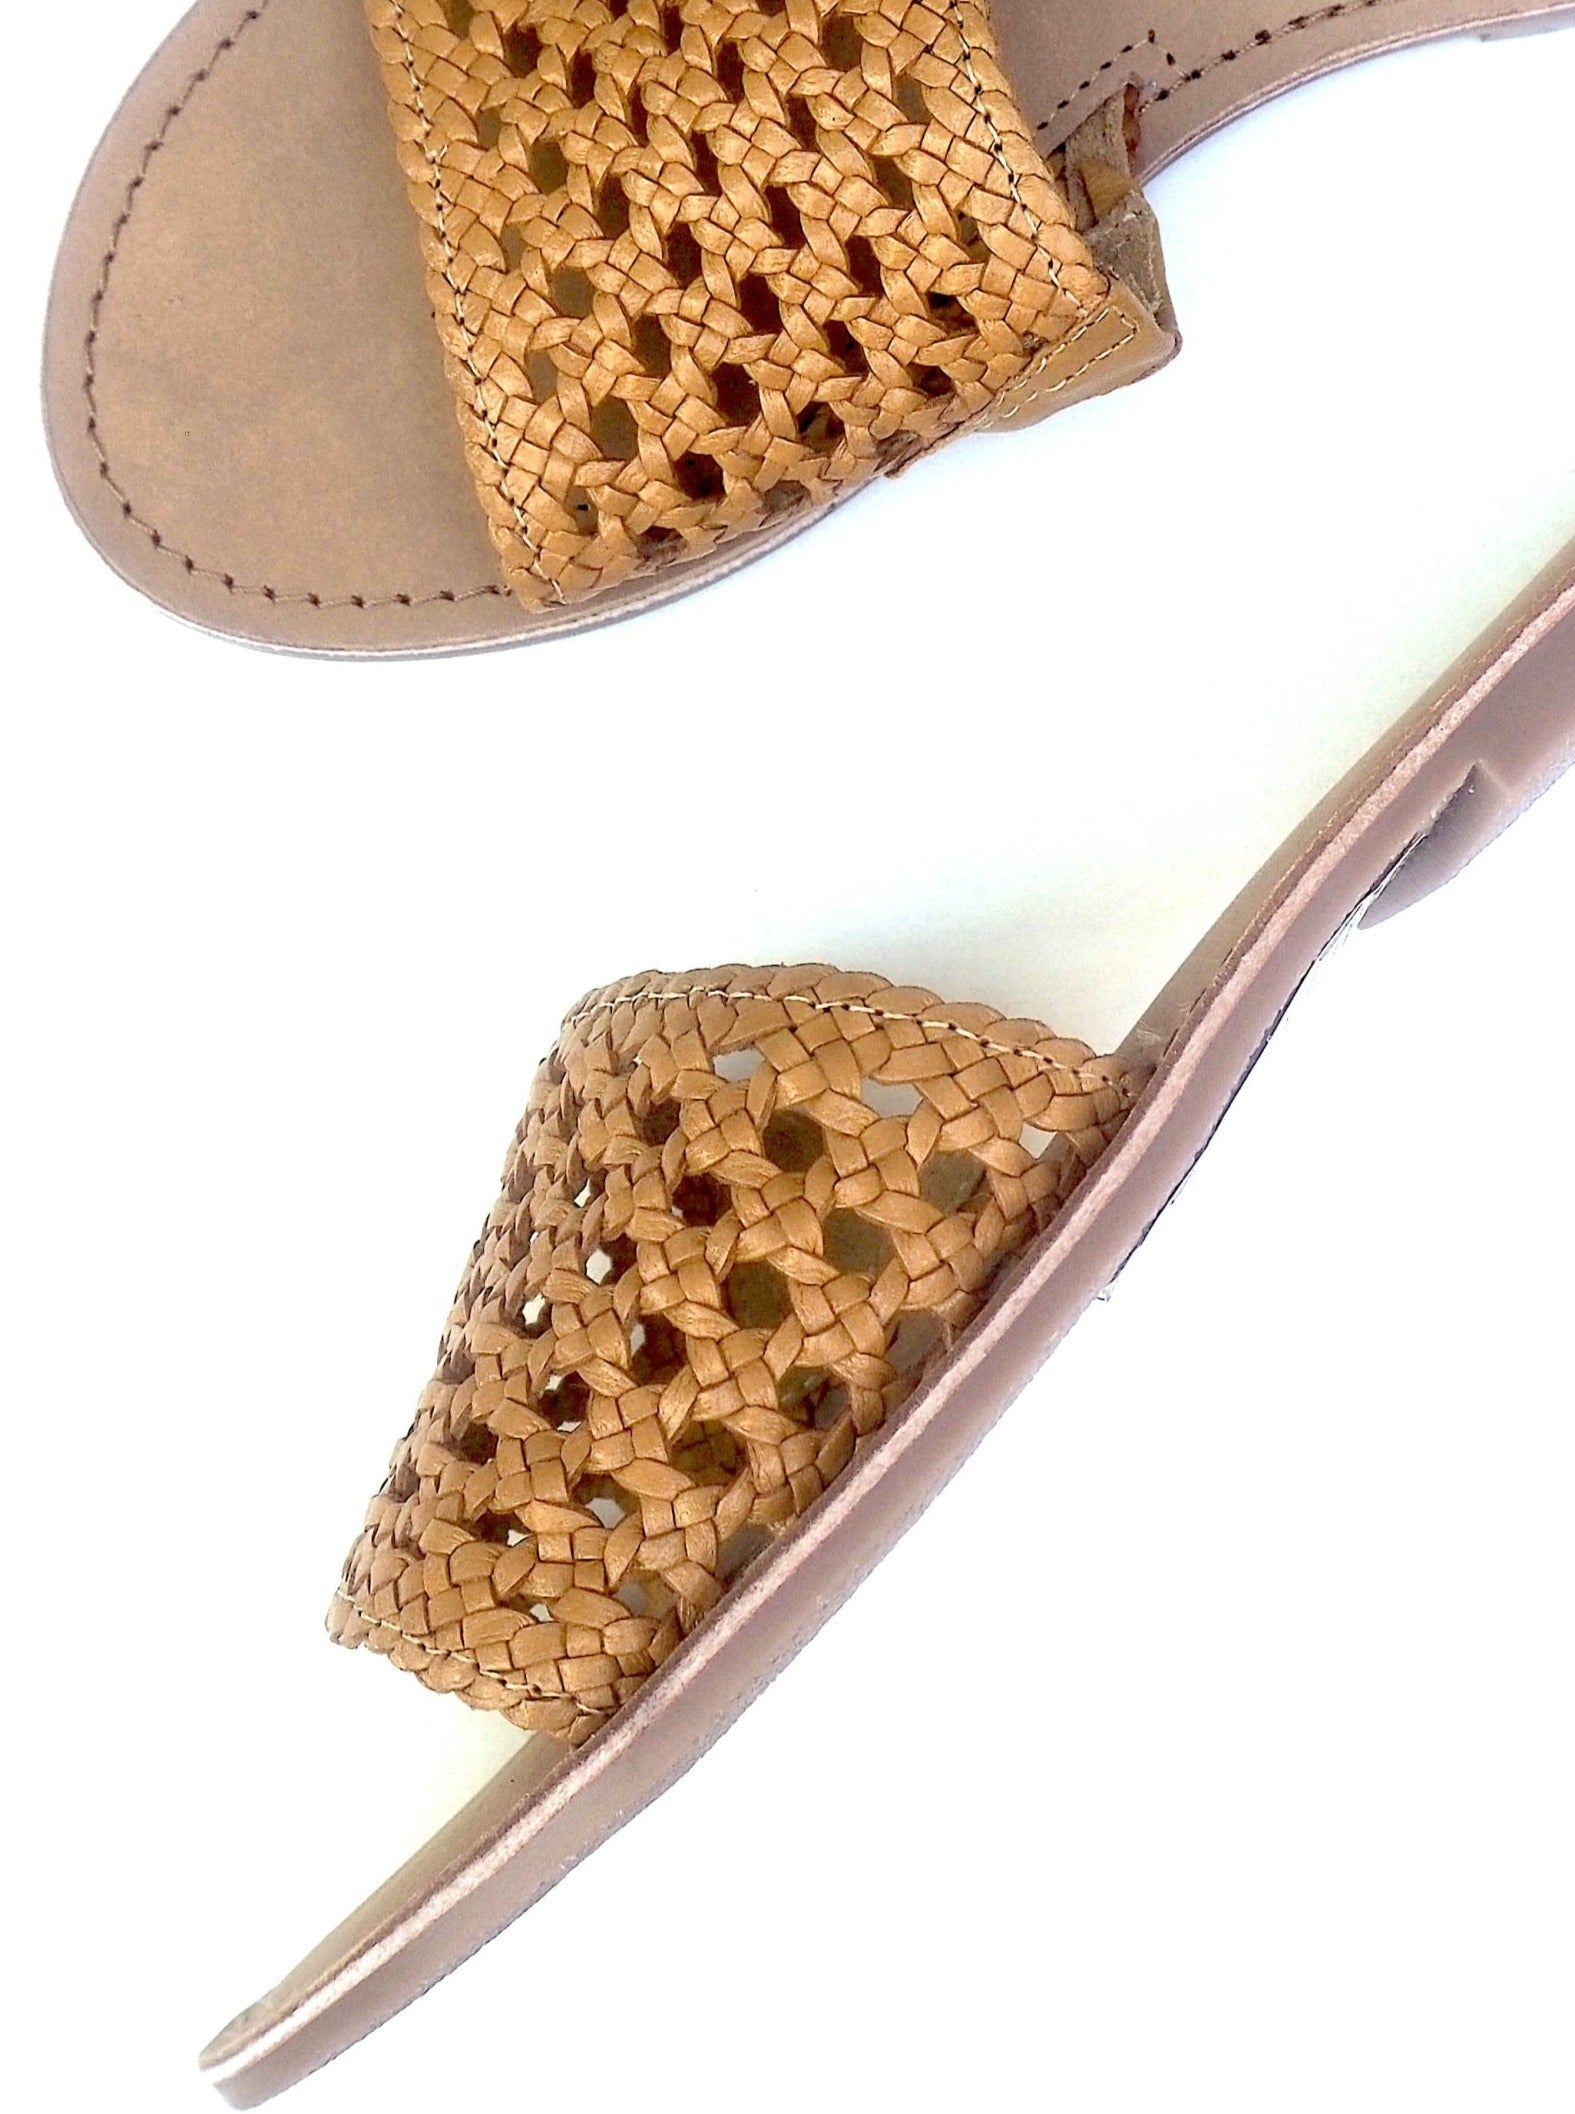 salt+umber Handwoven Leather Sandal in our signature open weave leather. Open weave design with slip-on style and our natural buff leather insole for maximum comfort. made in India